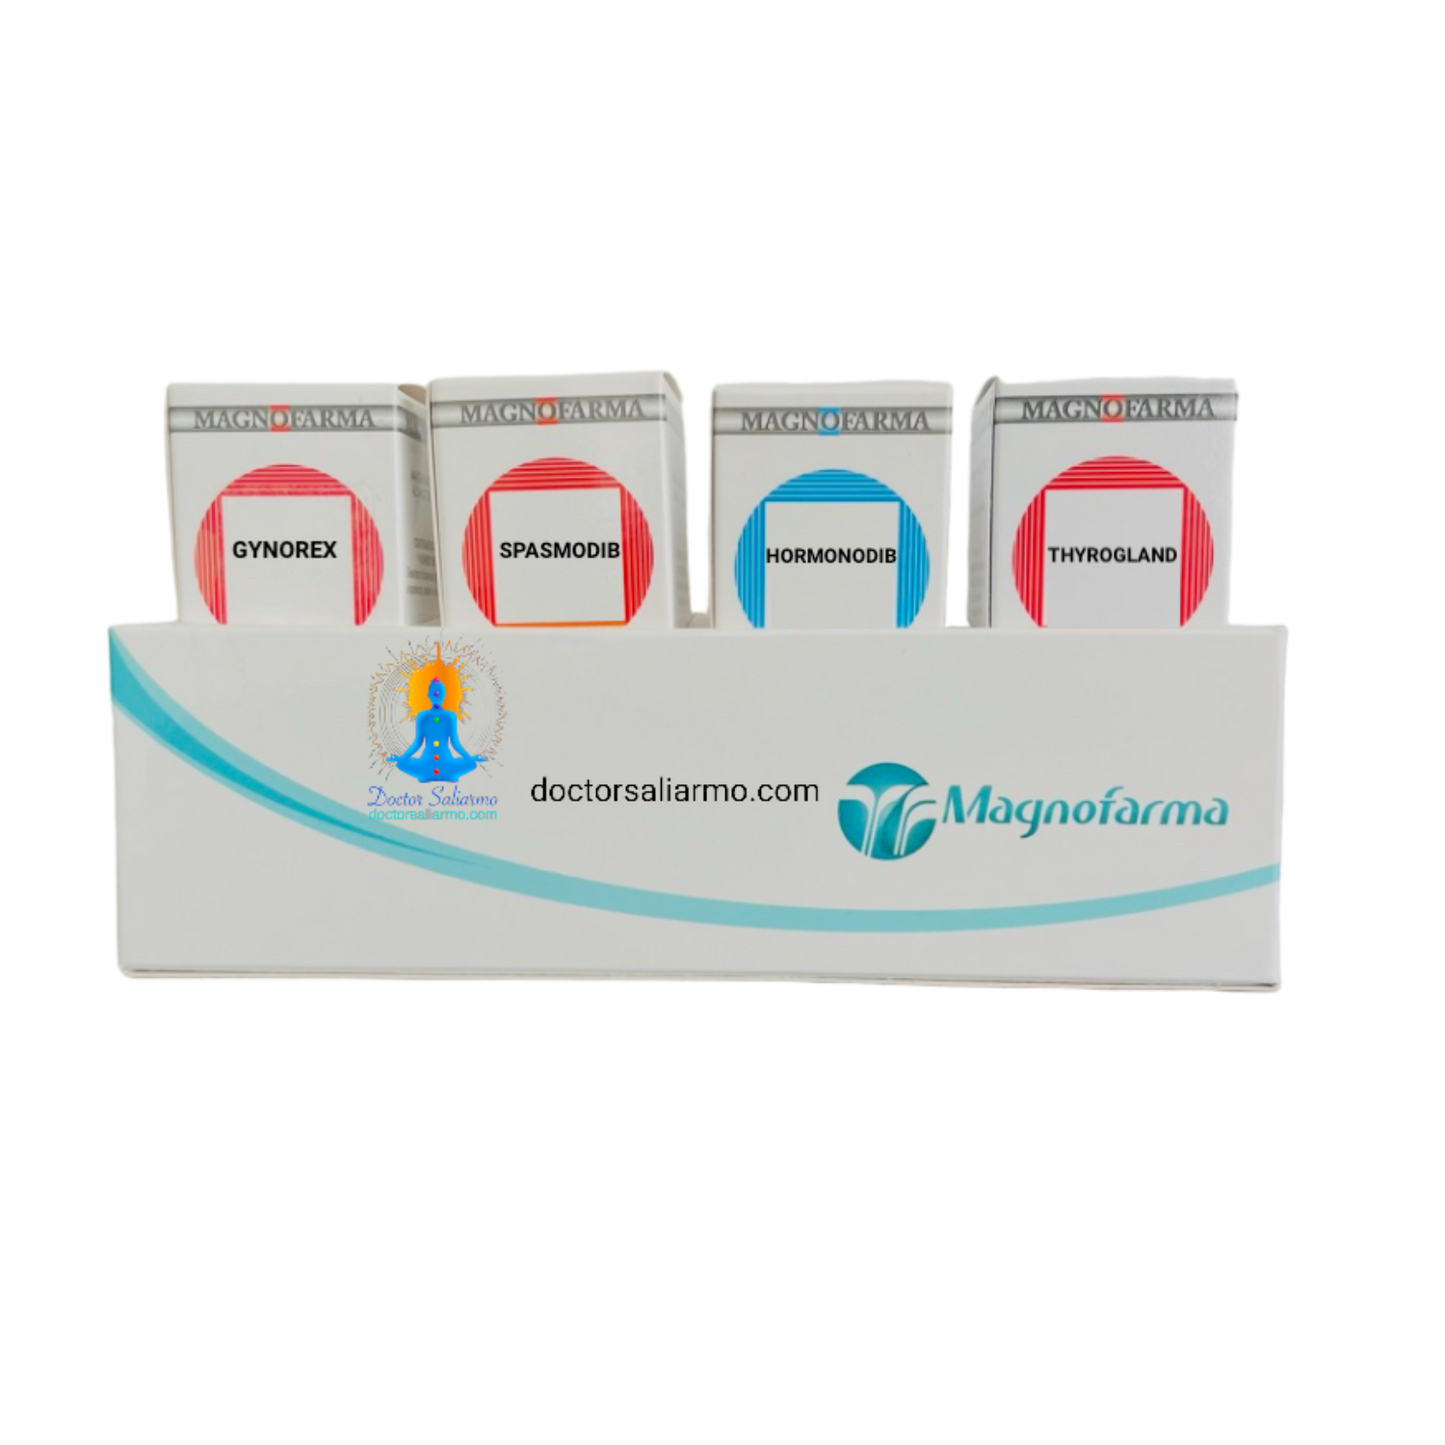 HOLODREN HORMONAL: Excellent modulator of female hormonal and thyroid functions.